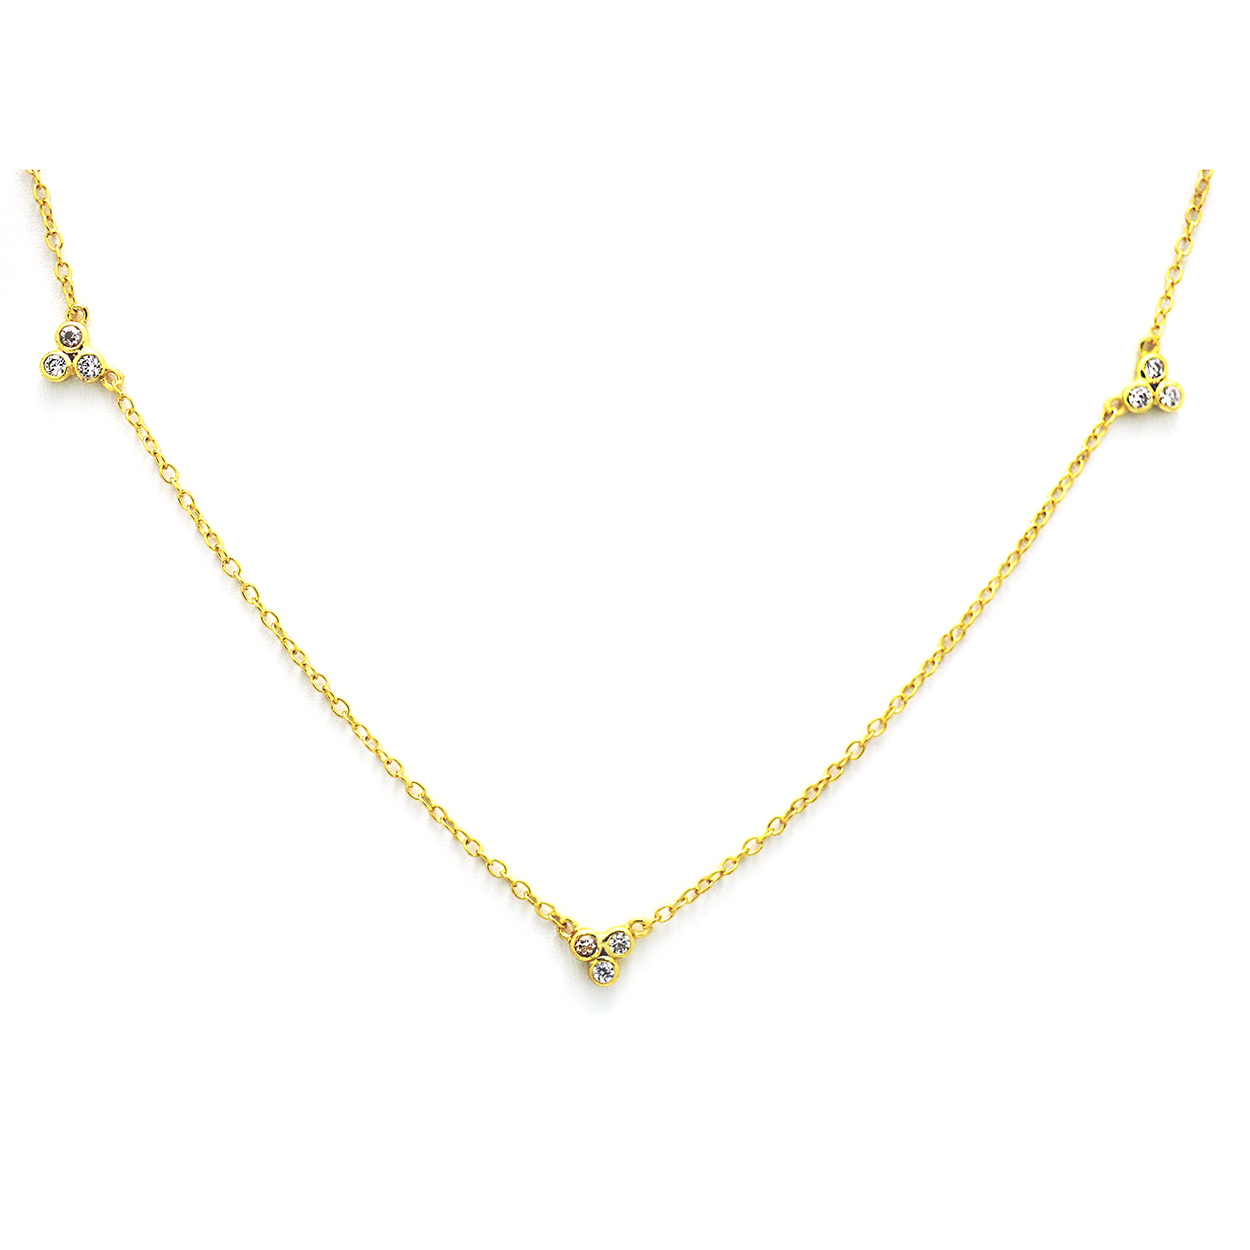 18kt Yellow Gold Plated Necklace with Triple Set Cubic Zirconia Charms